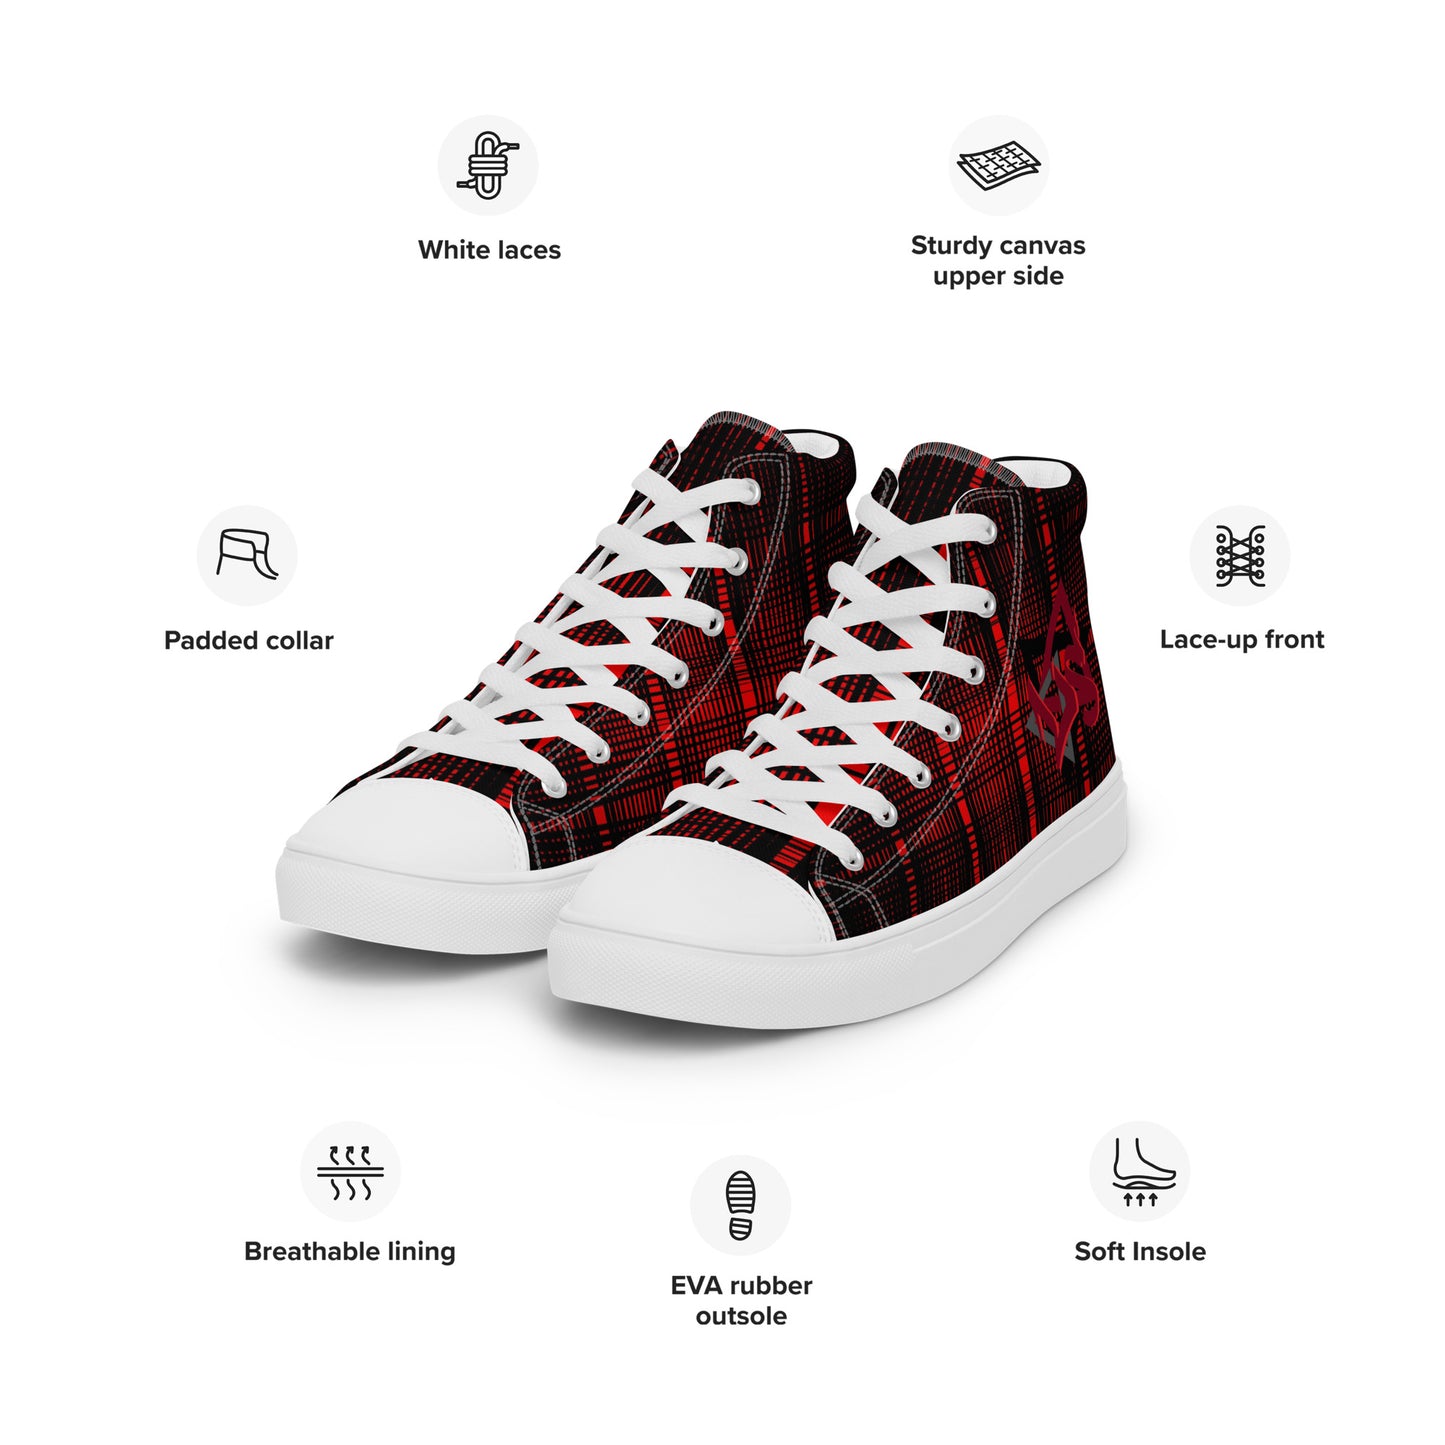 Check Mate! Women's High Top Canvas Shoes, Casual Lace up Canvas Shoes, Comfortable Fashion Classic Shoes